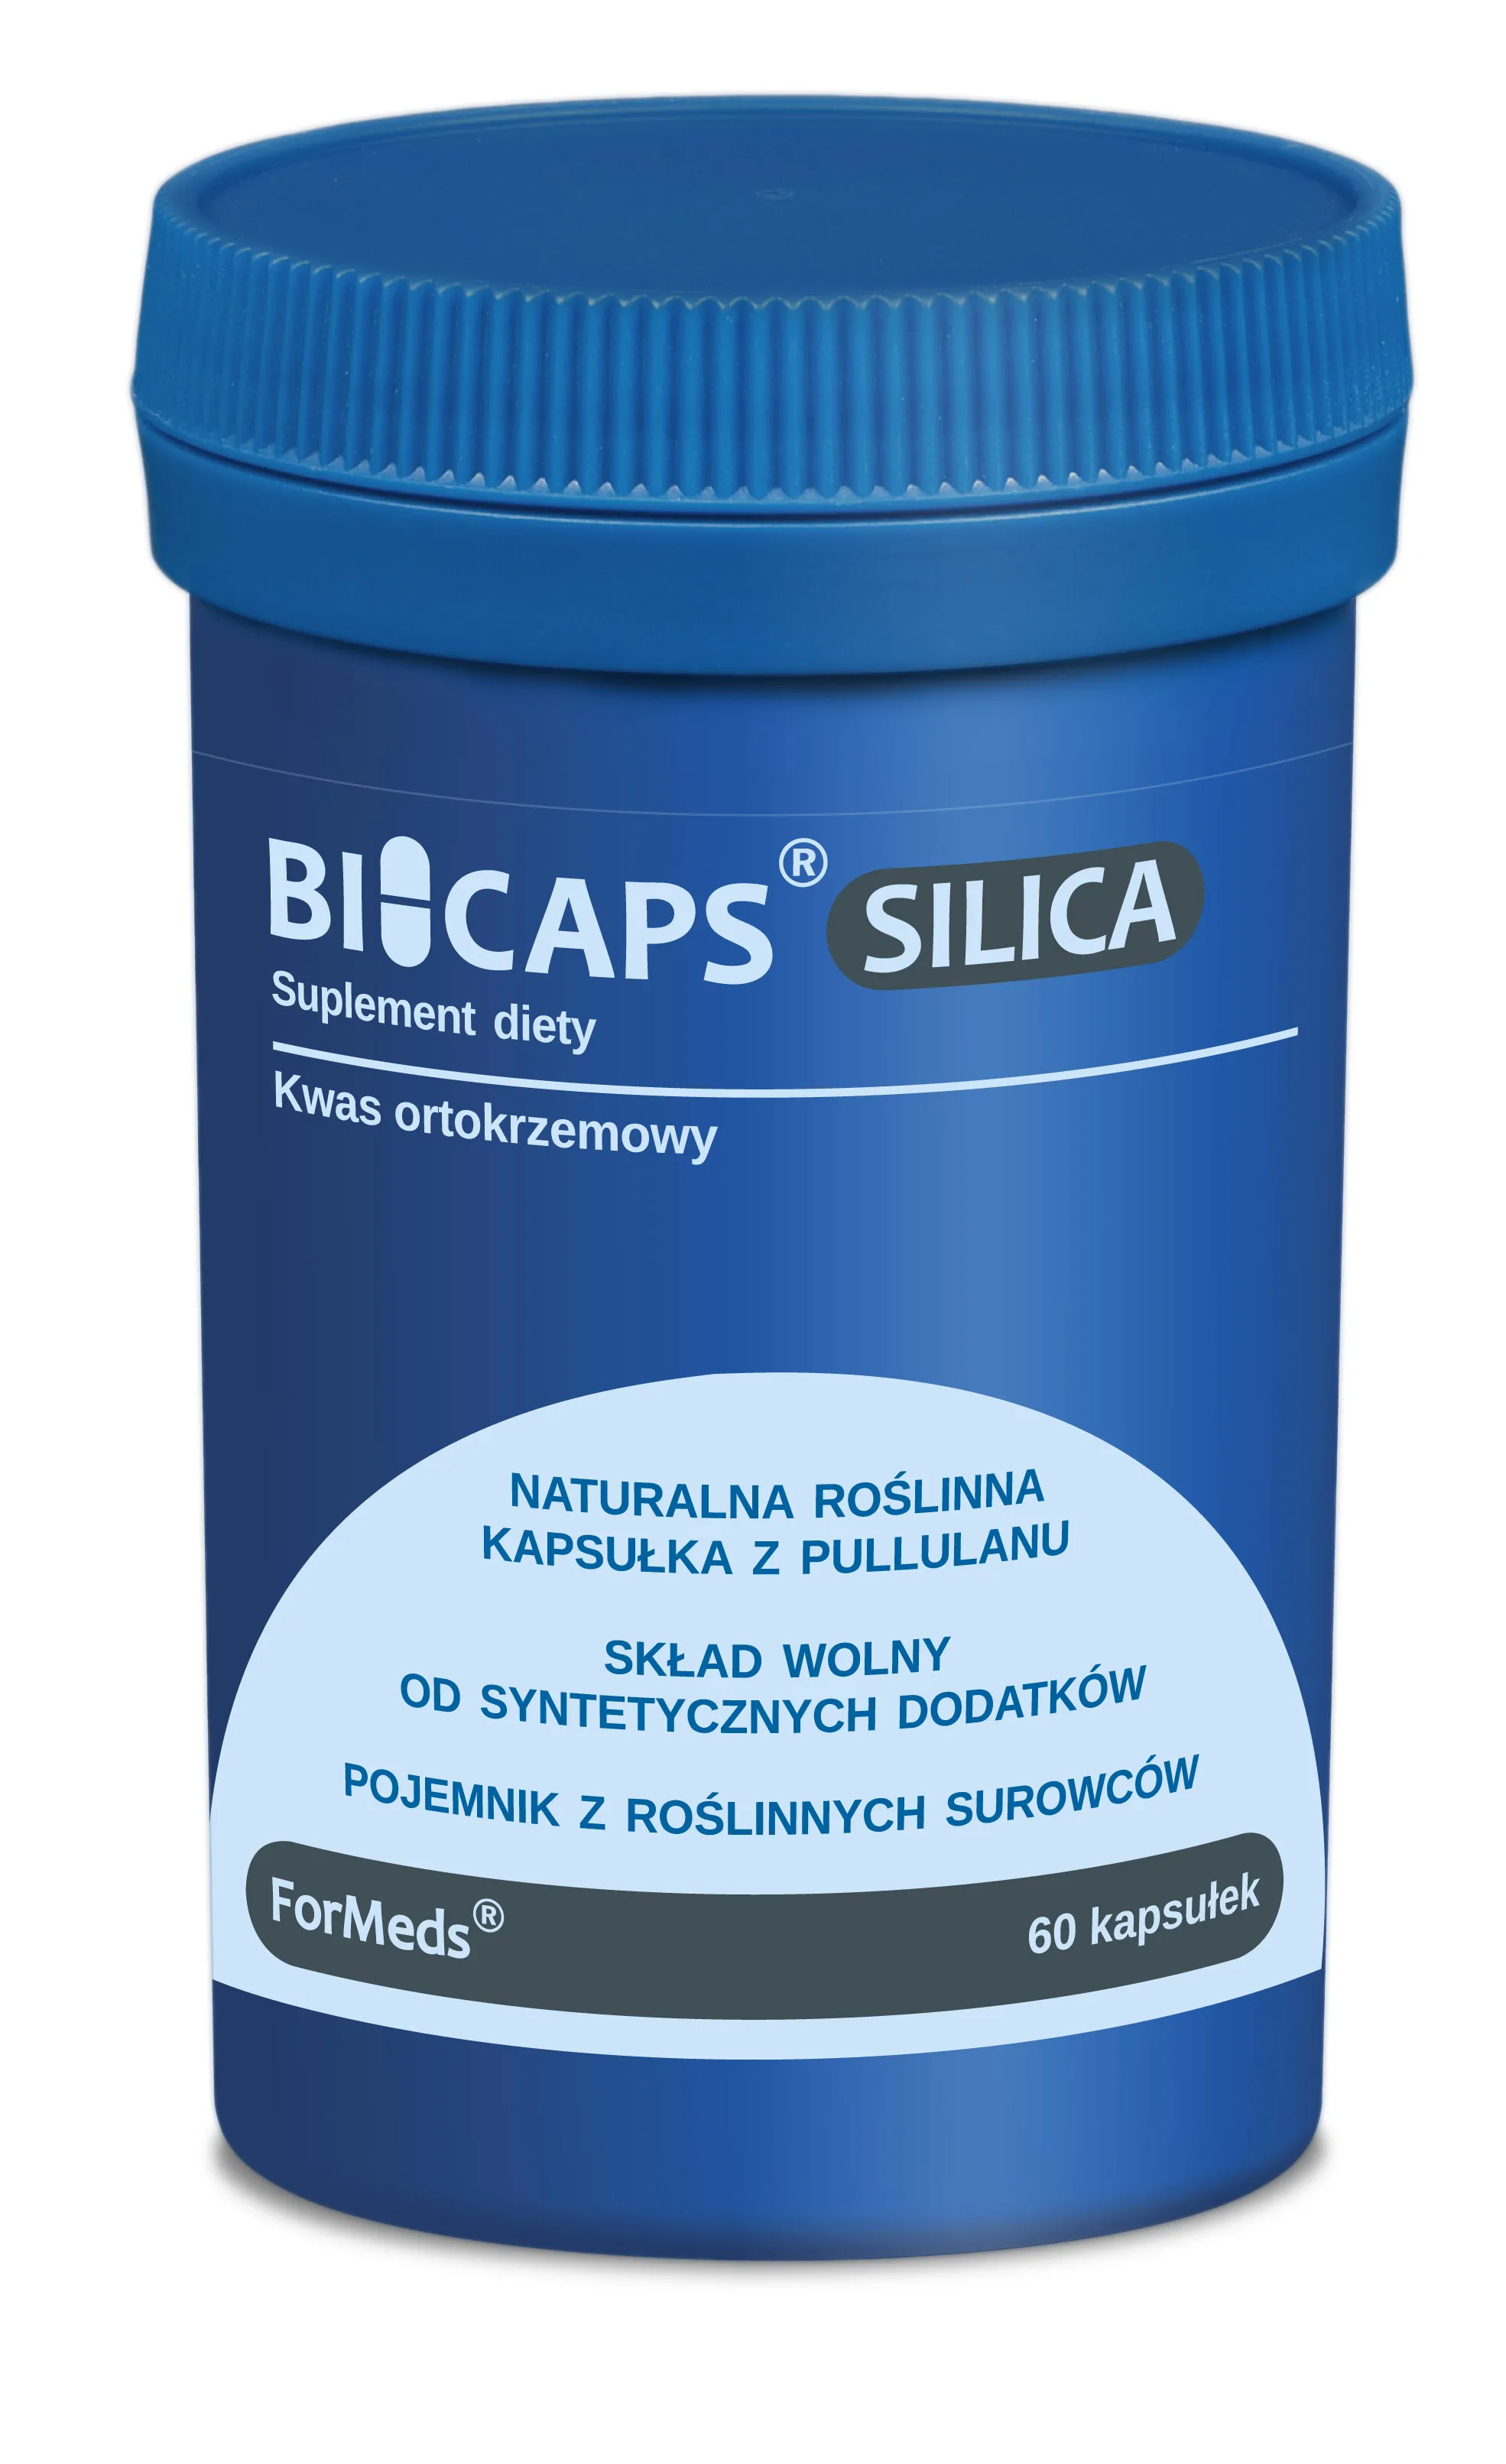 ForMeds Biscaps Silica, suplement diety, 60 kapsułek